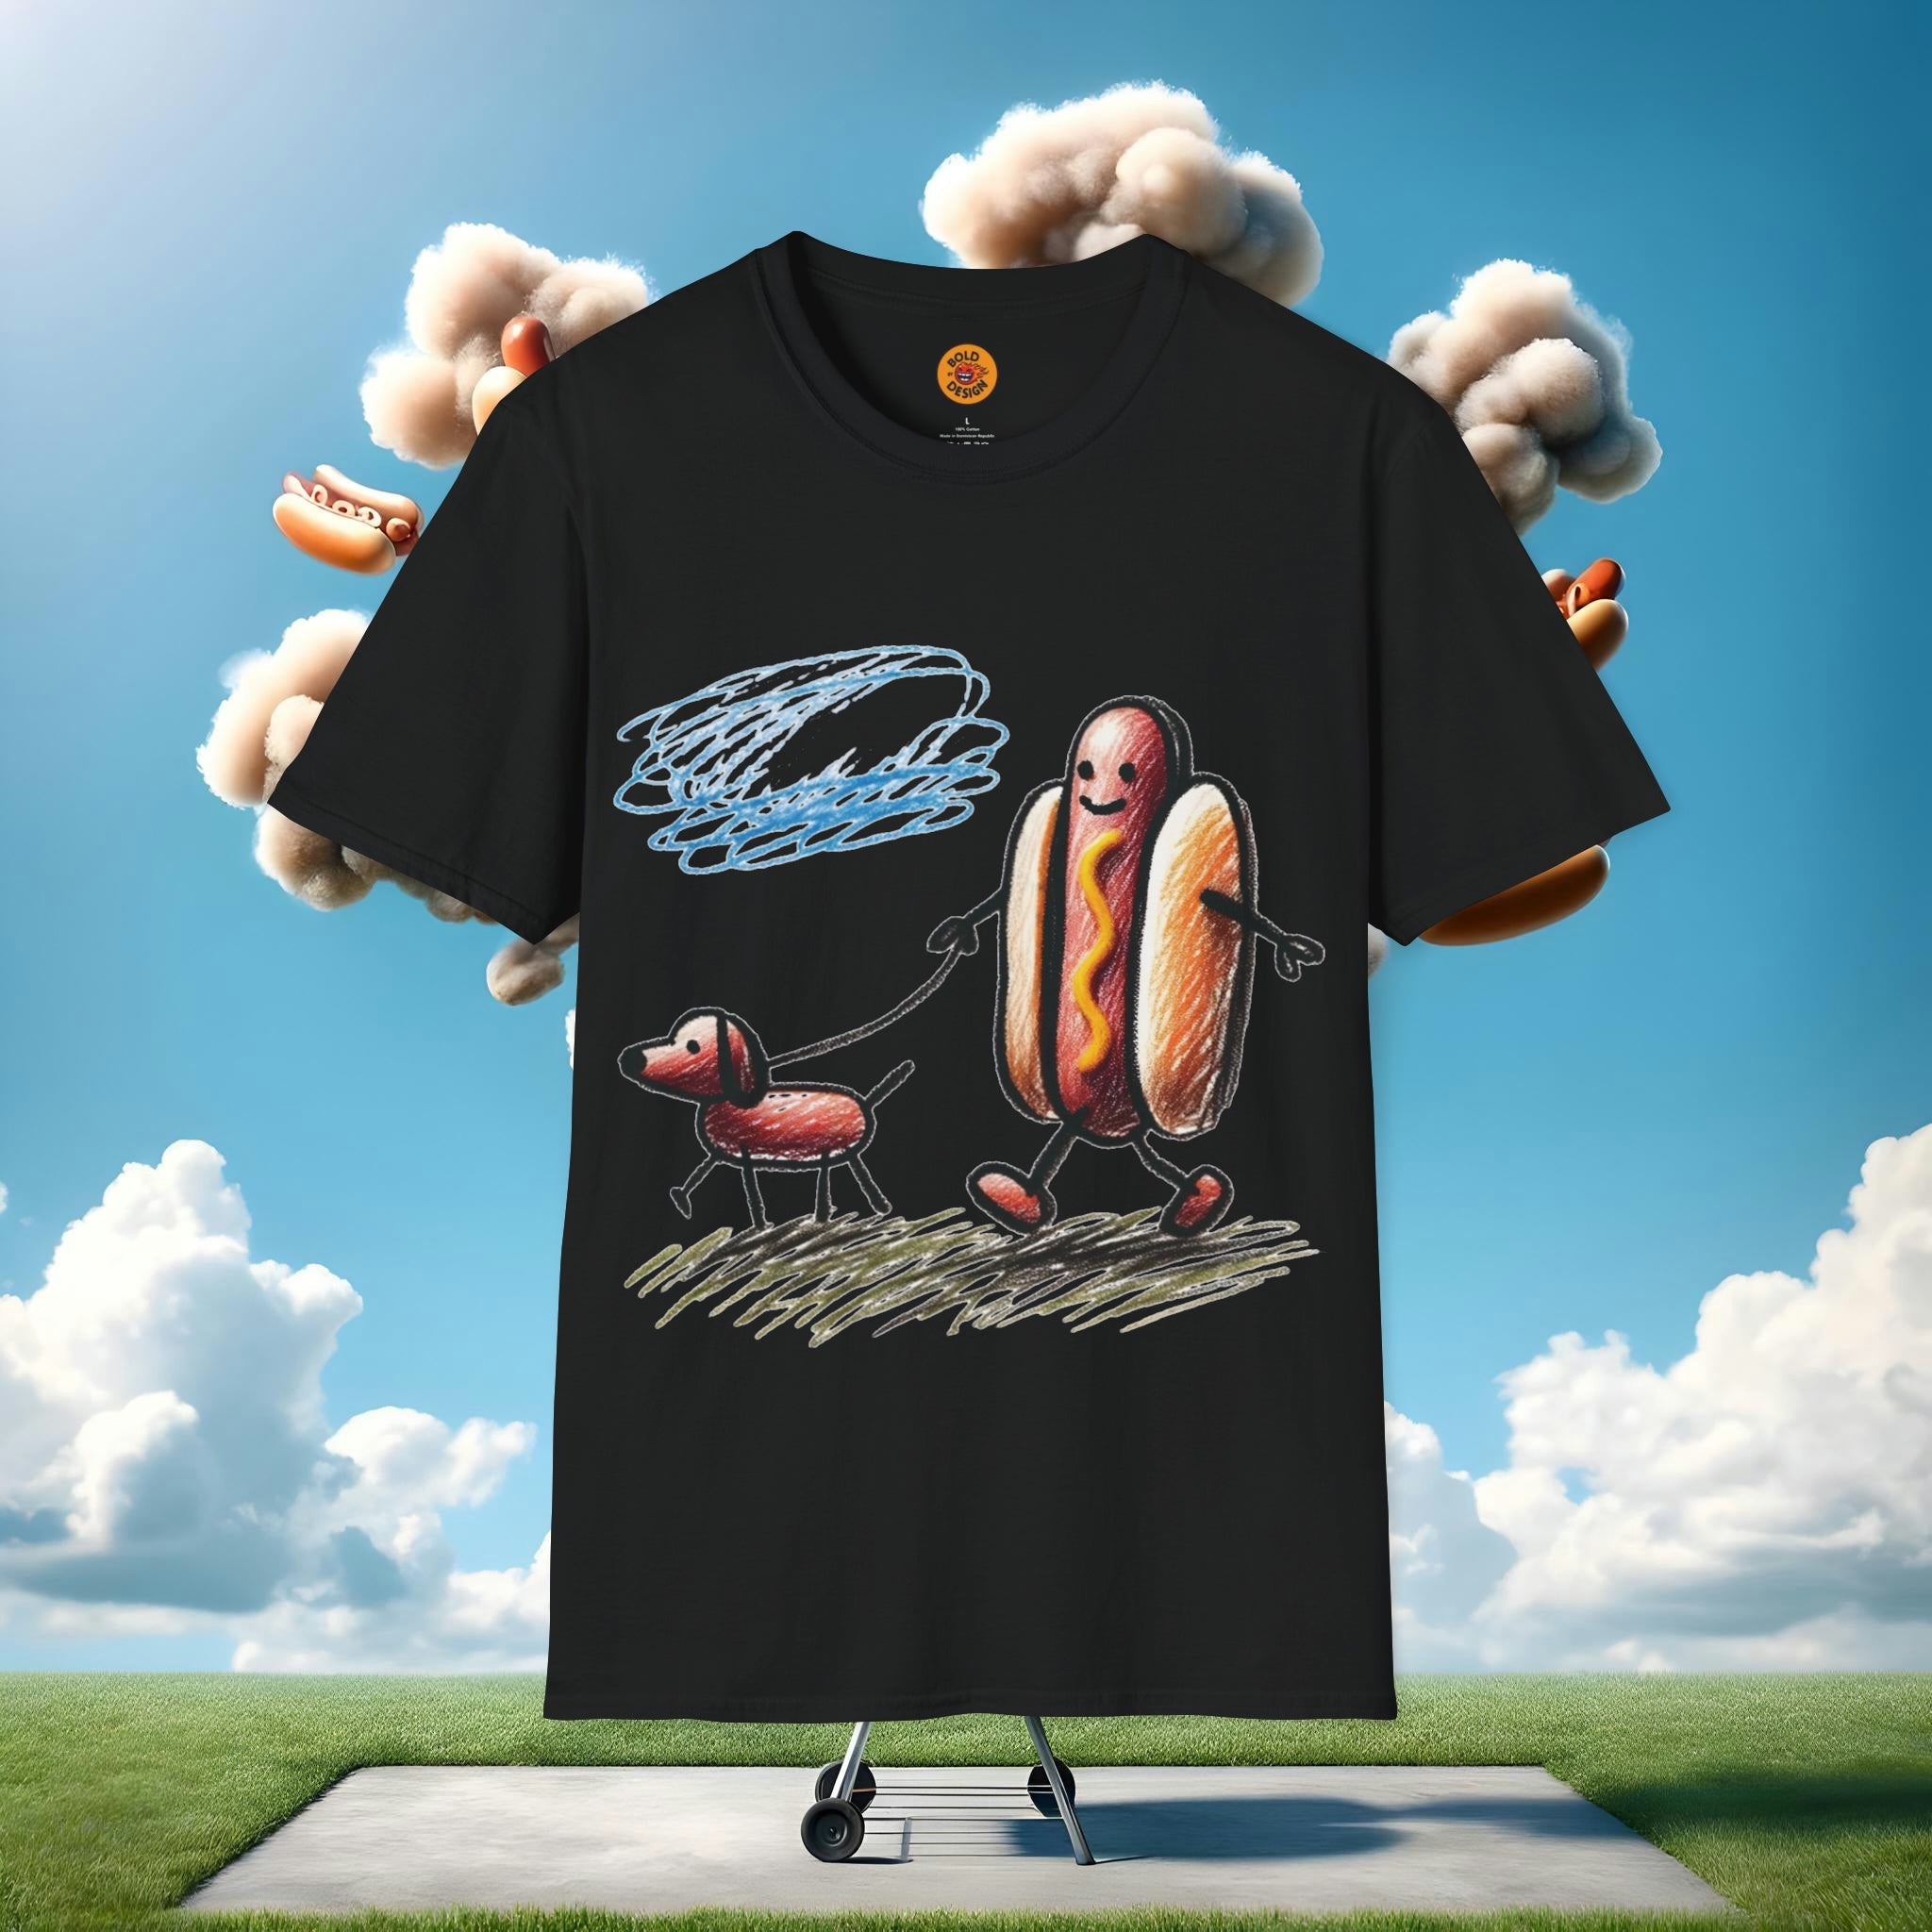 Hot Dog Doodle Shirt With Walking Sausage-Bold By Design 